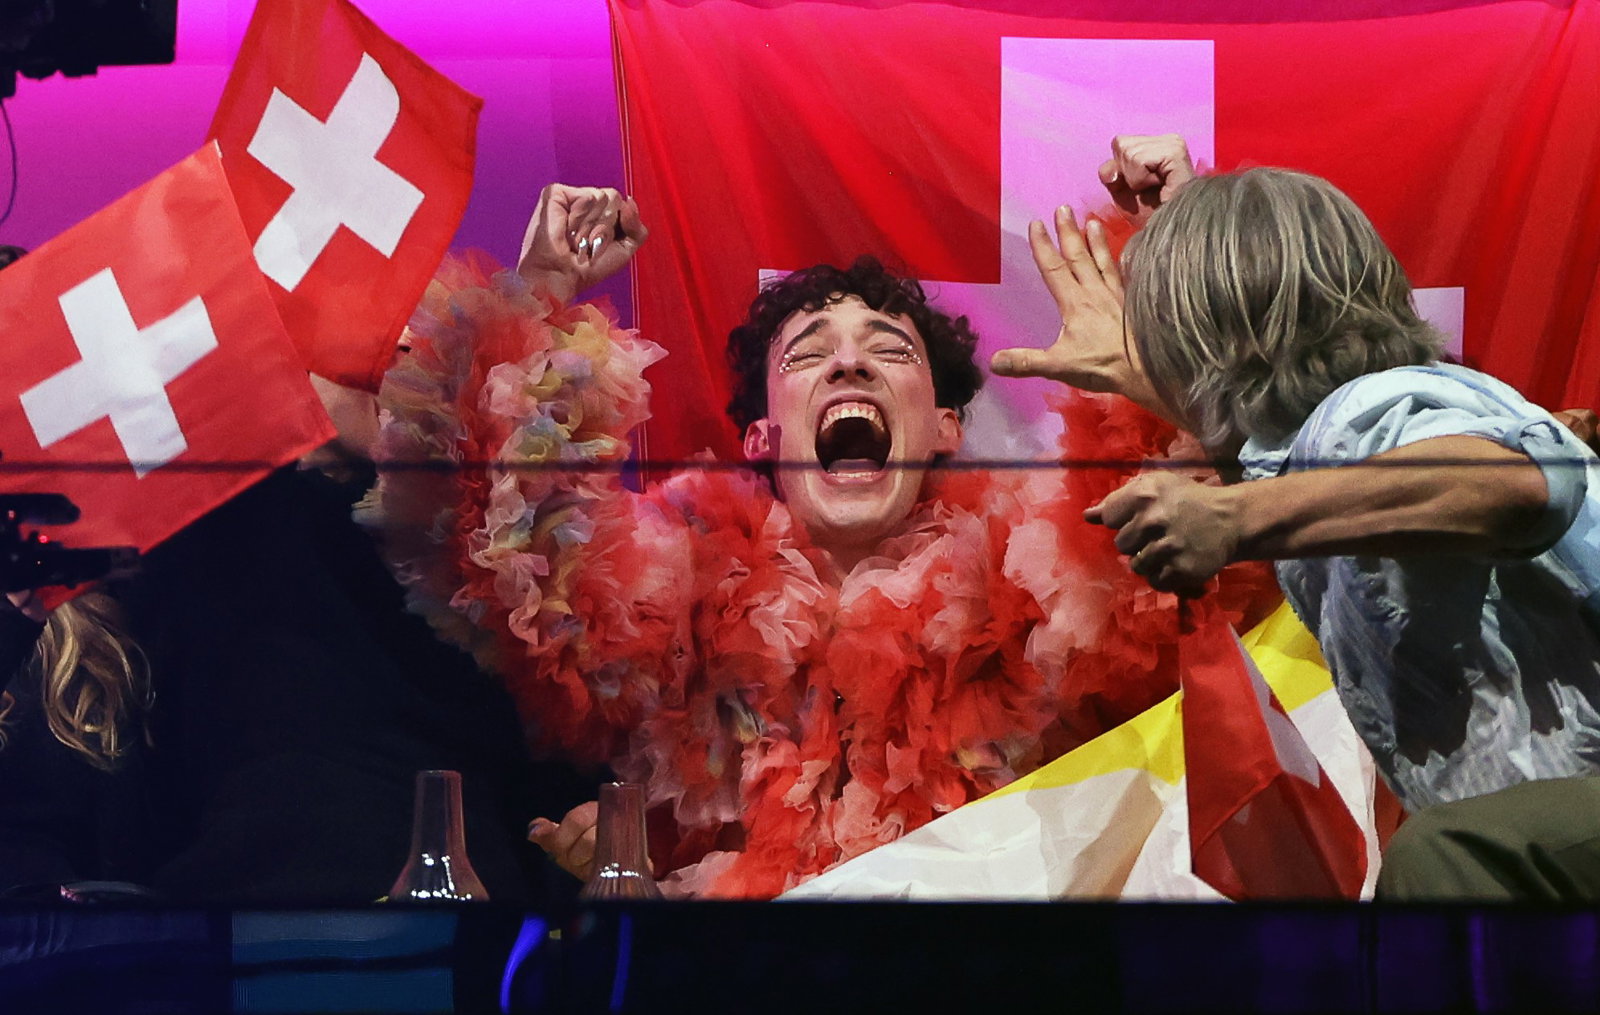 Artist nemo in red cheering as he wins Eurovision with the Swiss flag next to him